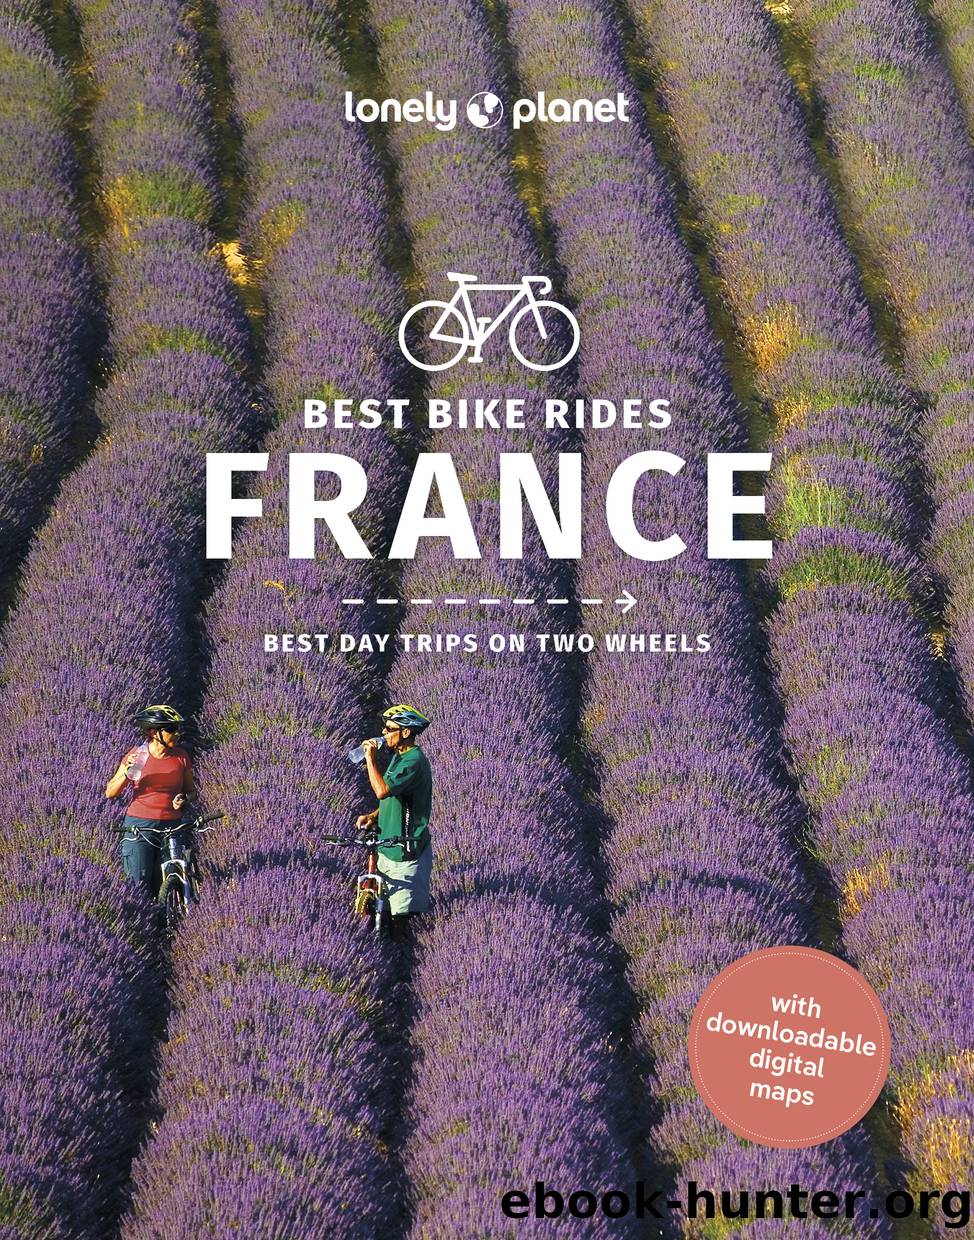 Lonely Planet Best Bike Rides France by Lonely Planet